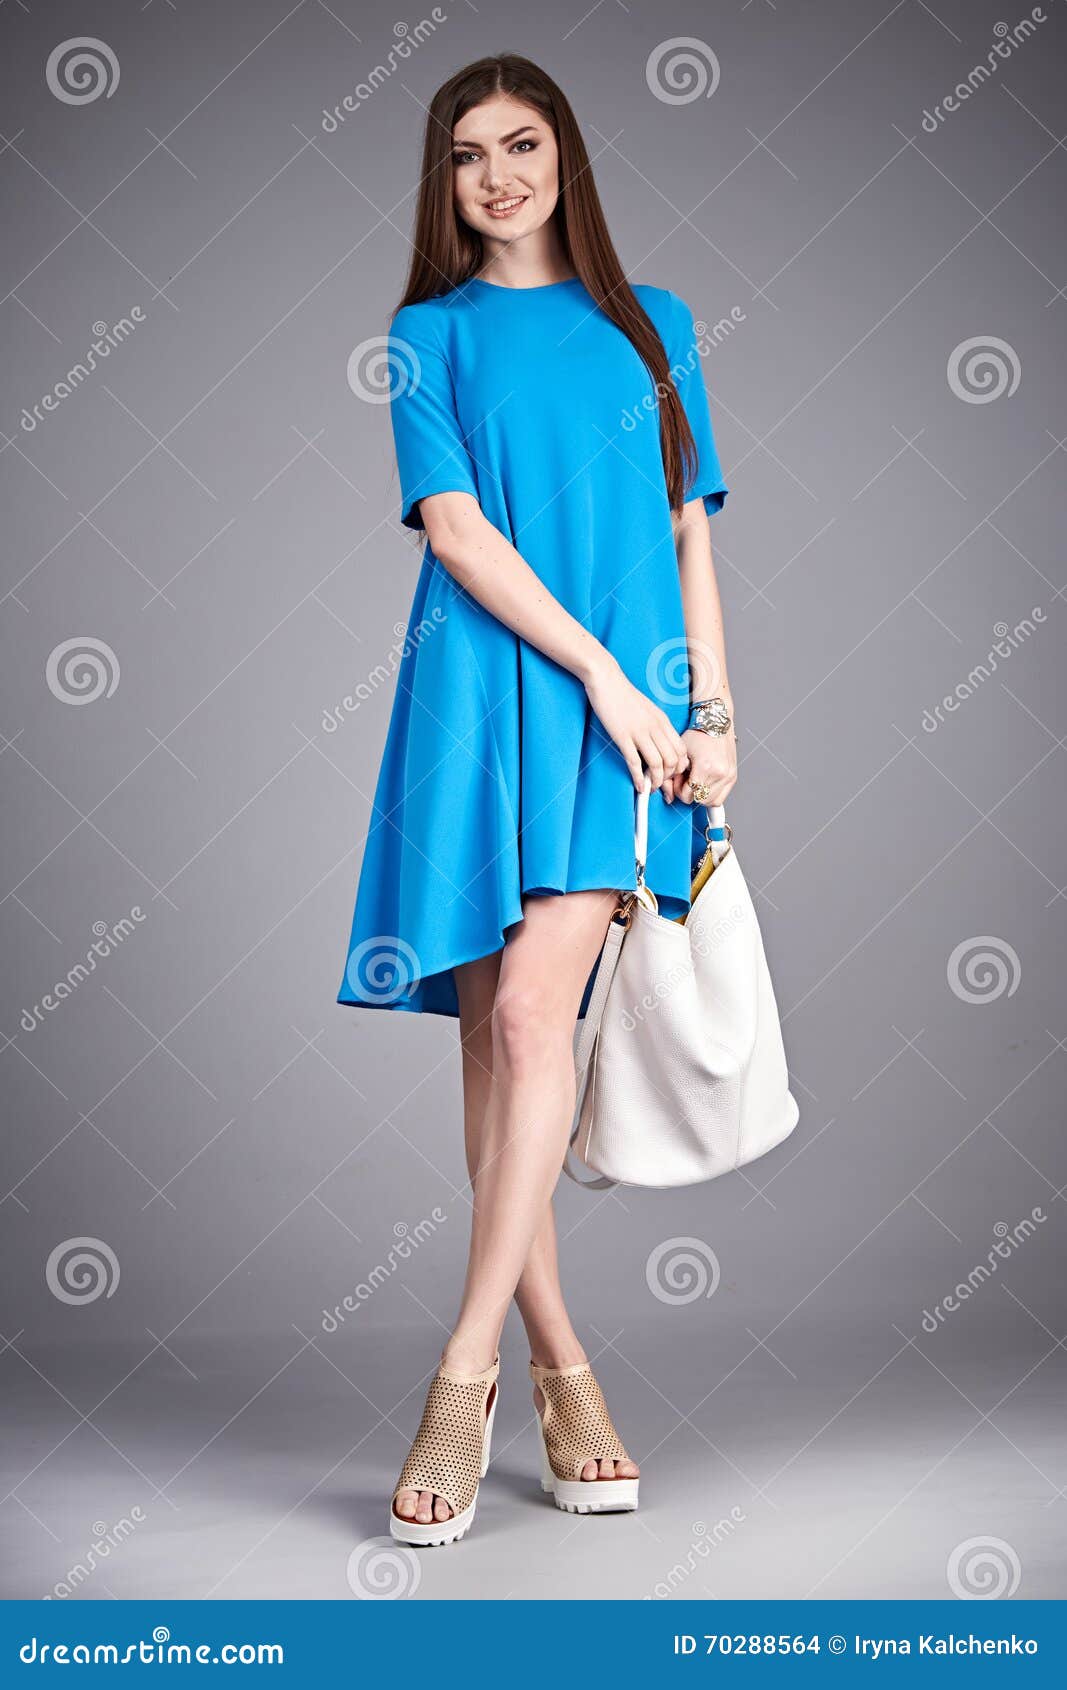 Catalog of Fashion Clothes for Business Woman Mom Casual Office Style  Meeting Walk Party Silk Cotton Dress Summer Collection Stock Photo - Image  of accessory, casual: 70288564